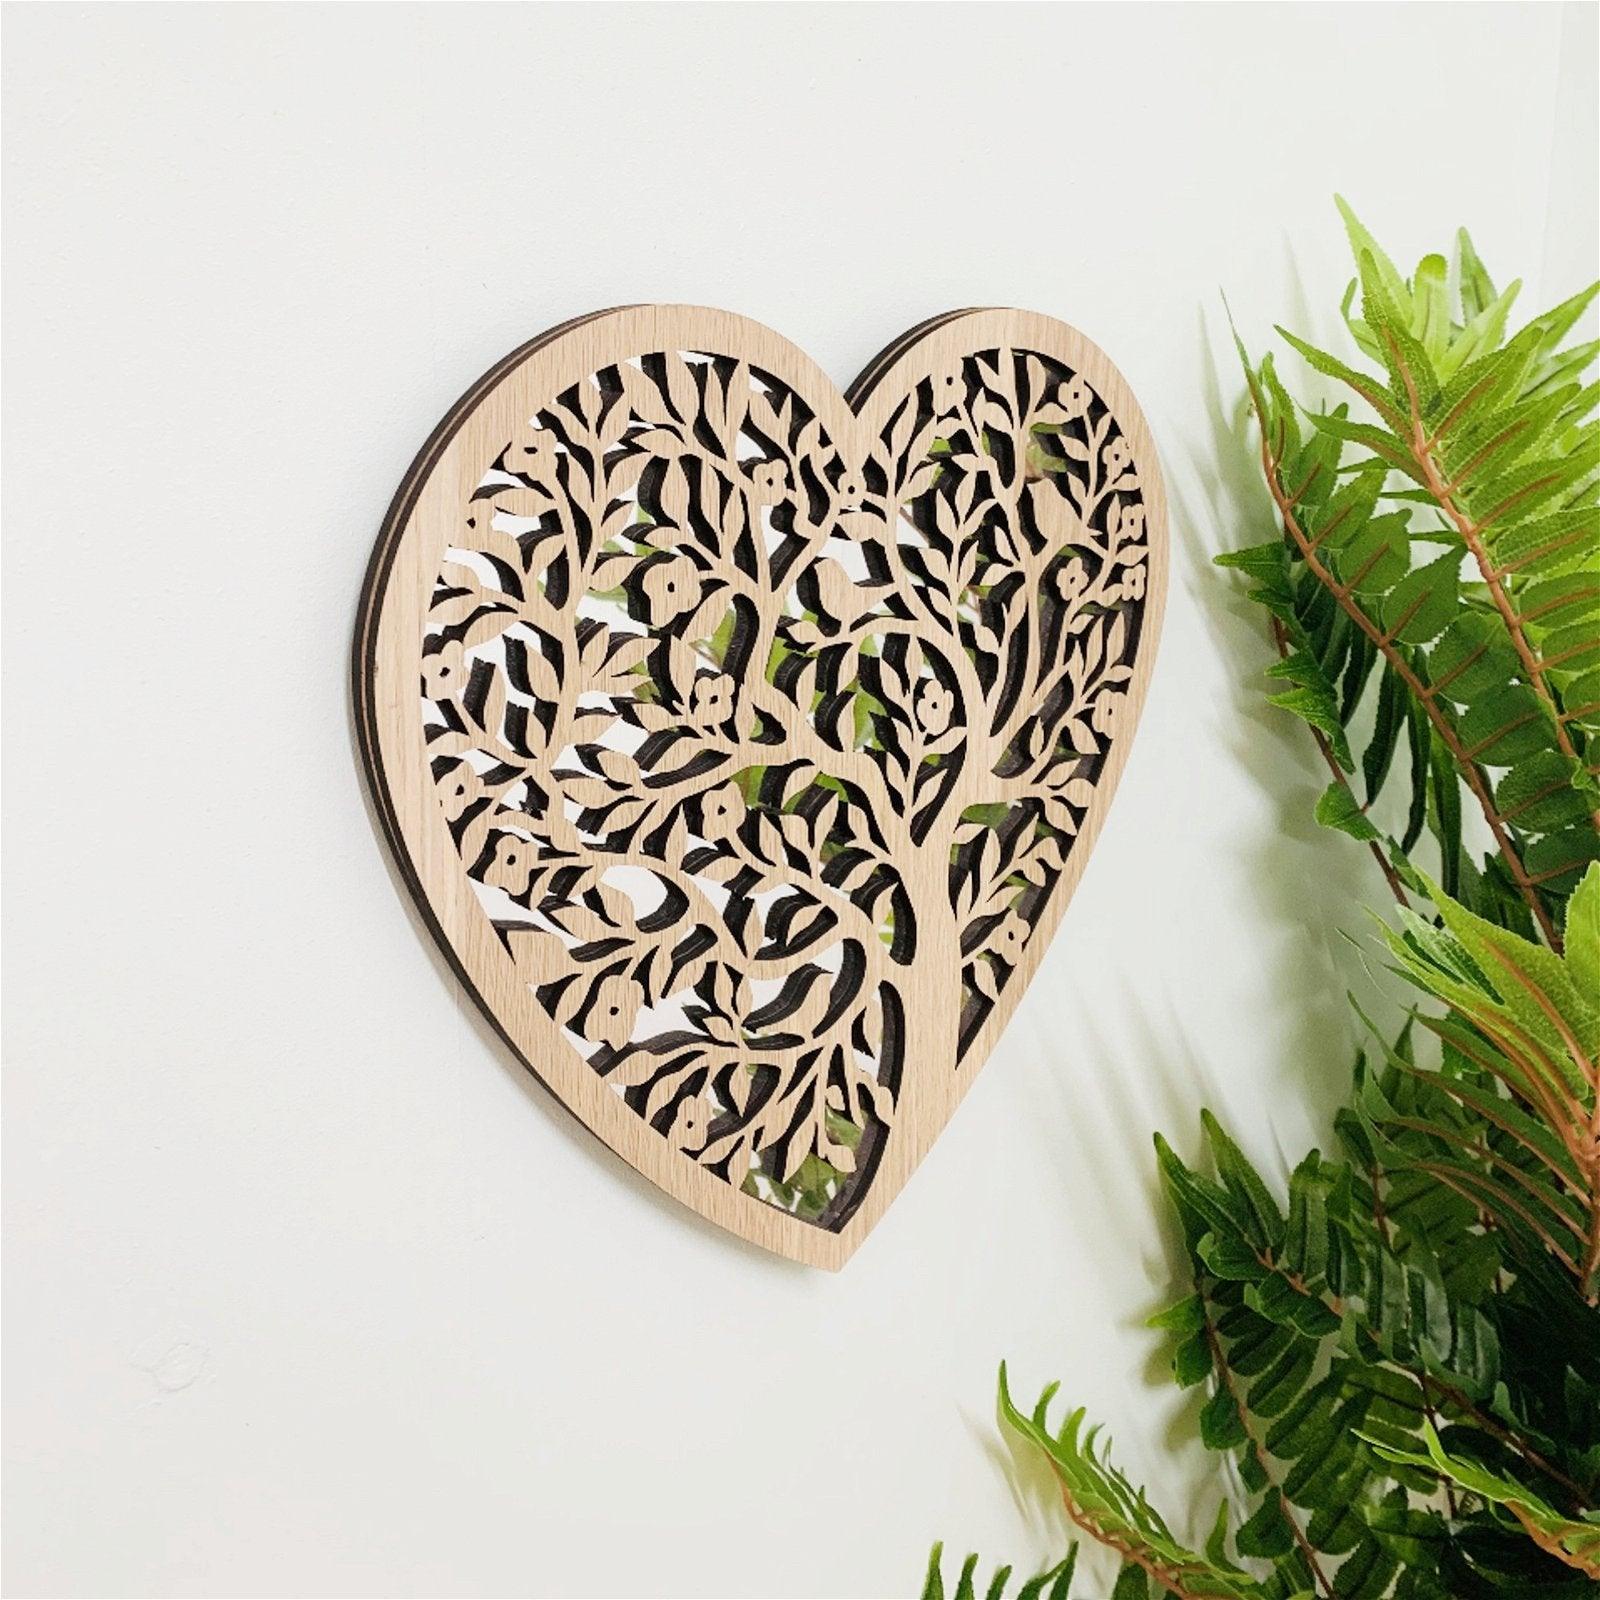 View Heart Tree Of Life Cut Out Mirror 31cm information